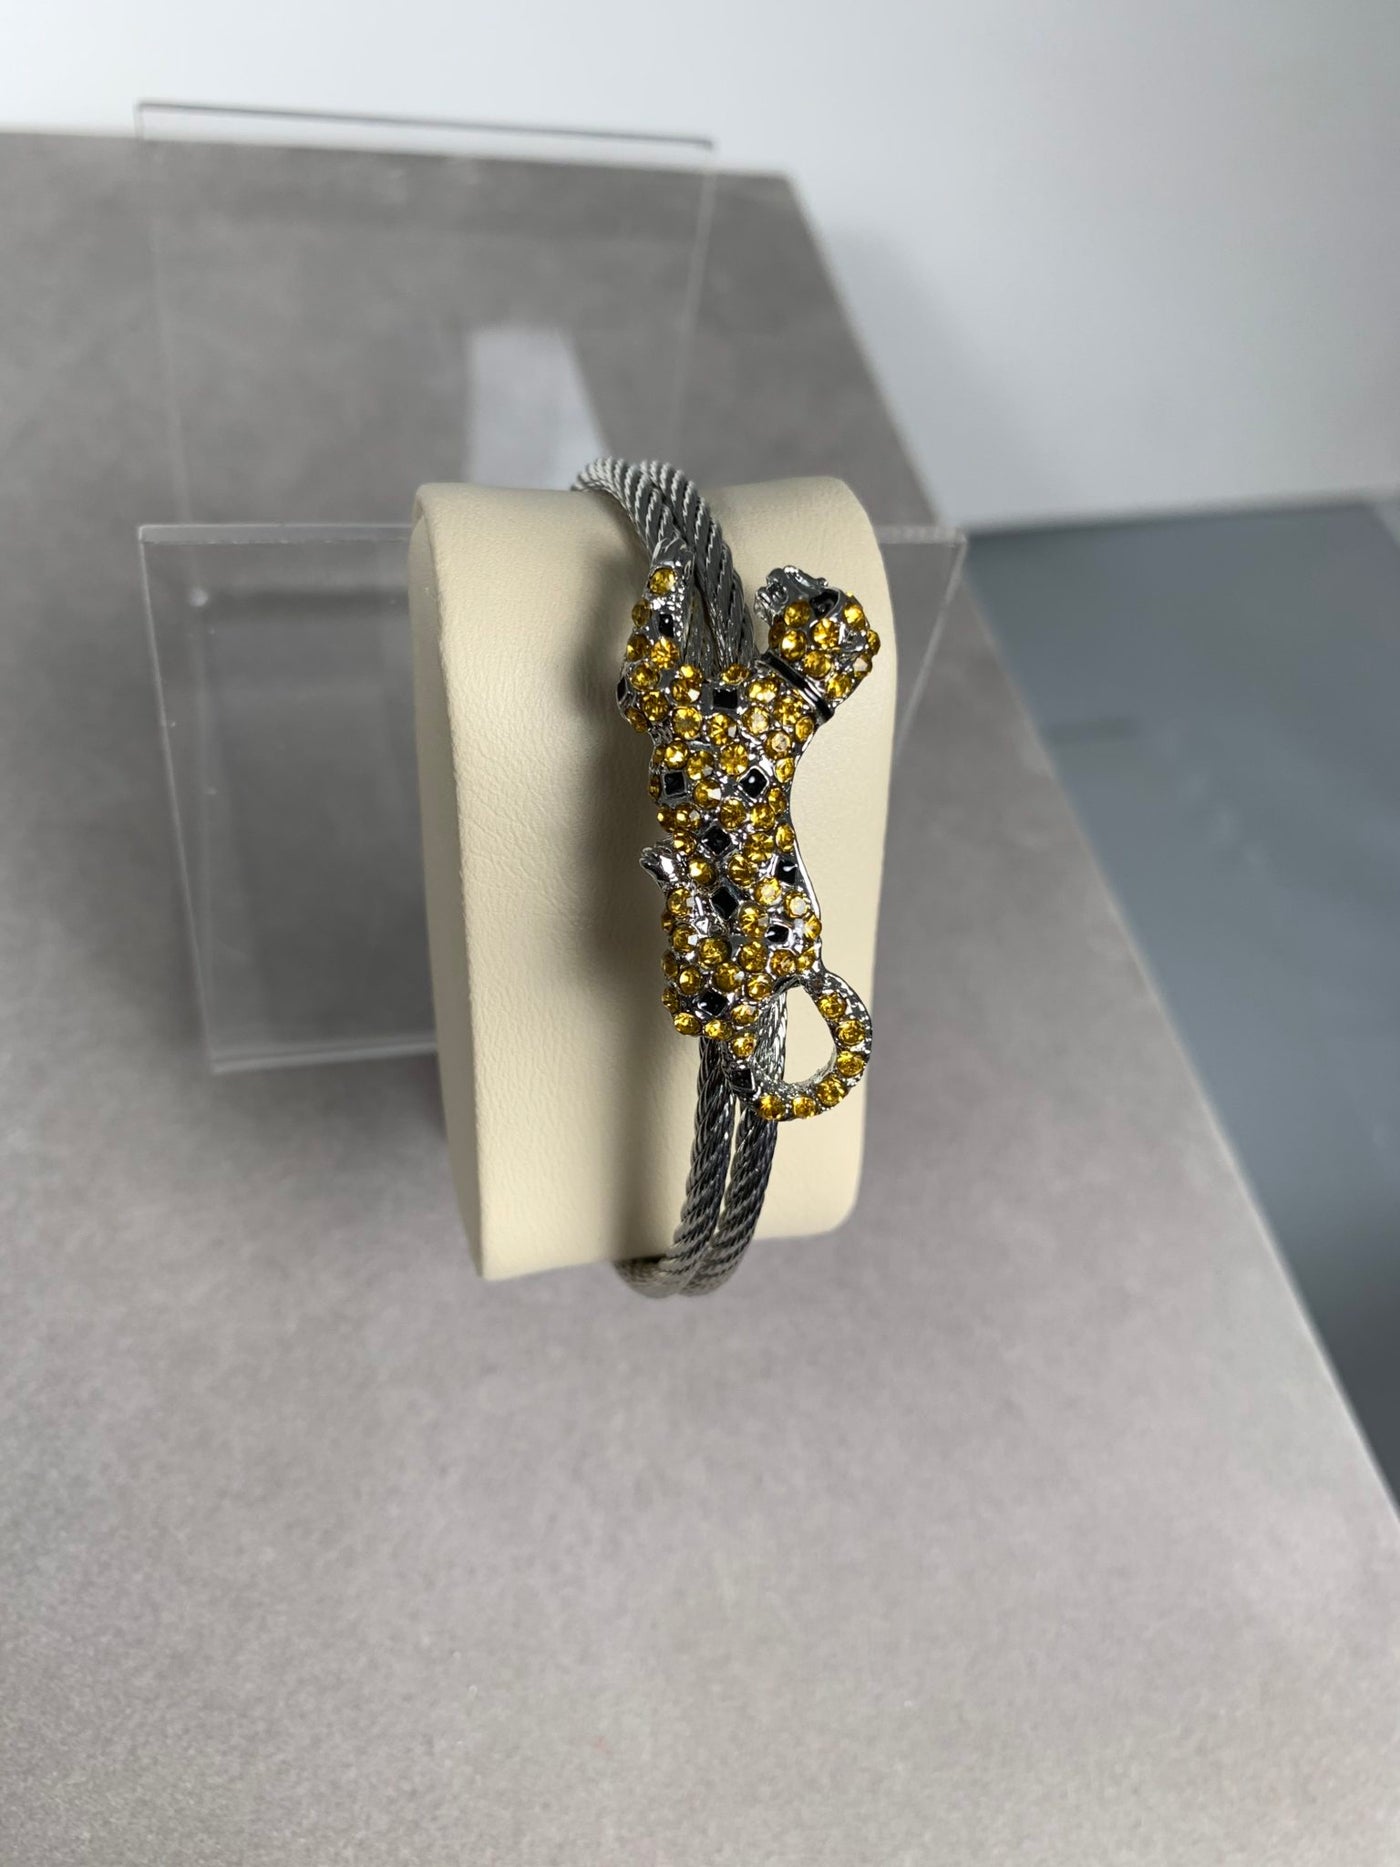 Silver Tone Double Wire Bangle Cuff with a Yellow Crystal Leopard